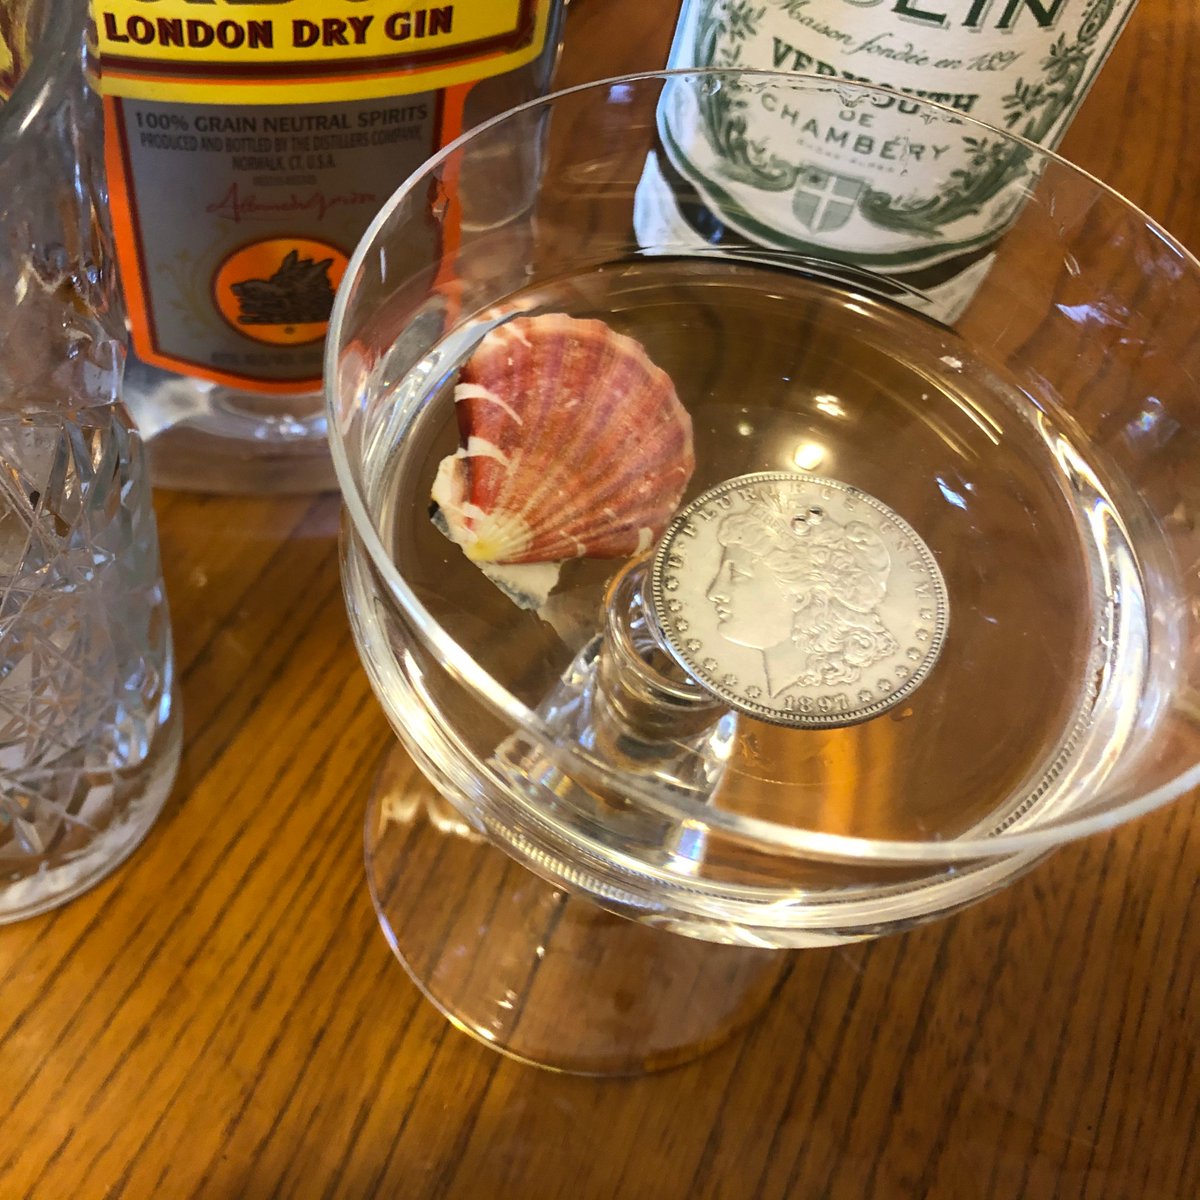 Strain the martini into a coupe and decorate with a thoroughly washed seashell (for calcium) and a silver dollar (for decoration). Do not ingest the garnishes. Enjoy. (10/73)